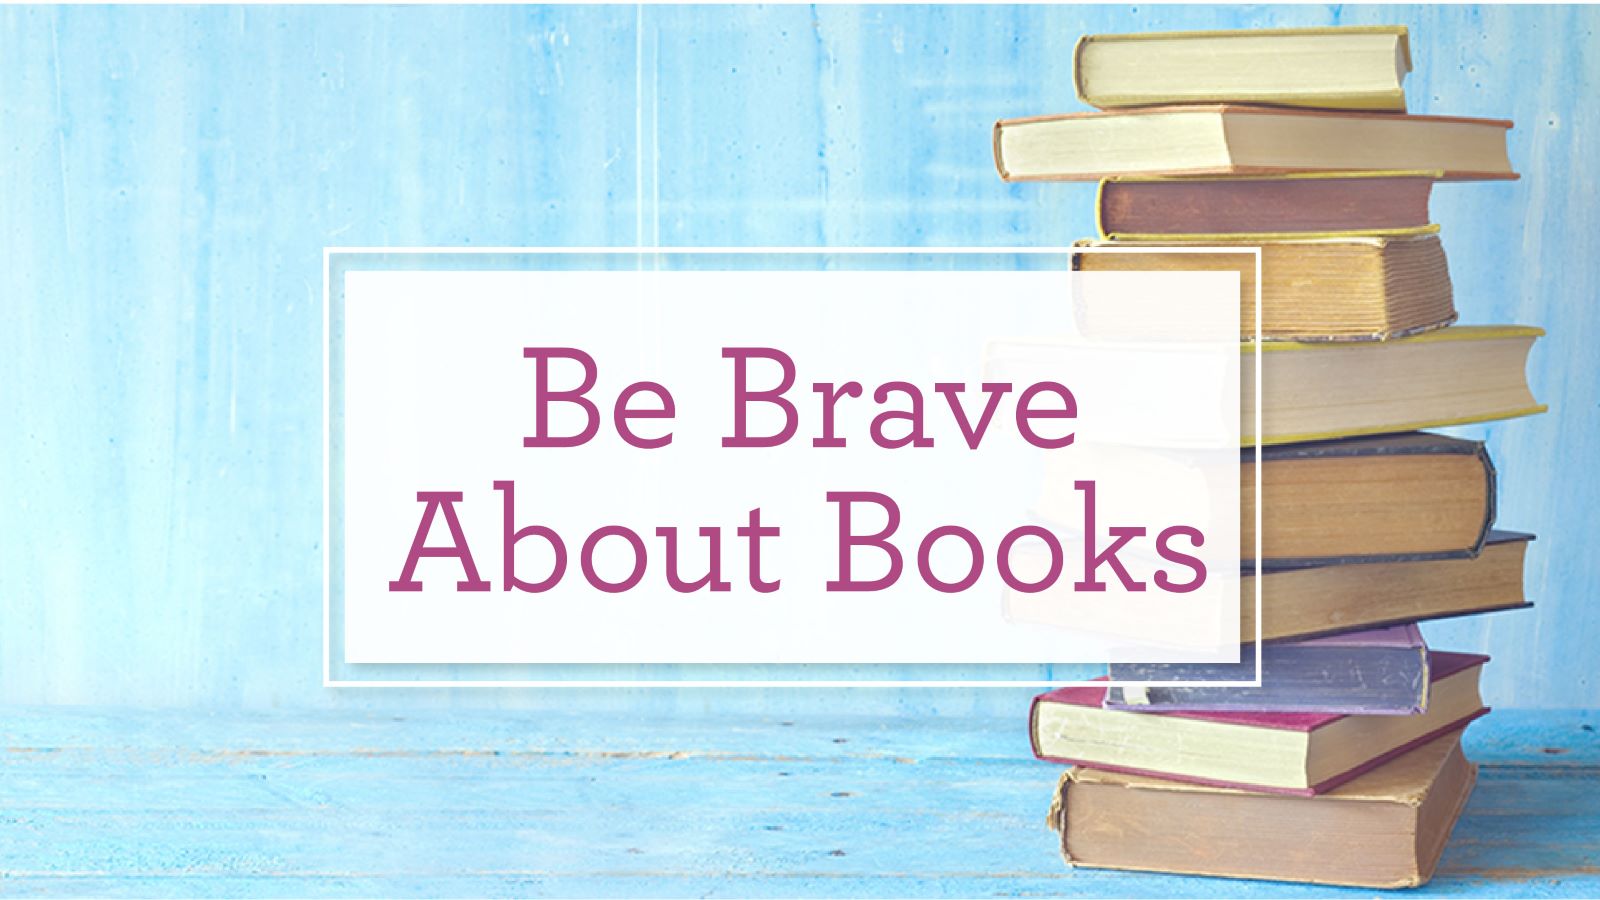 Be Brave About Books